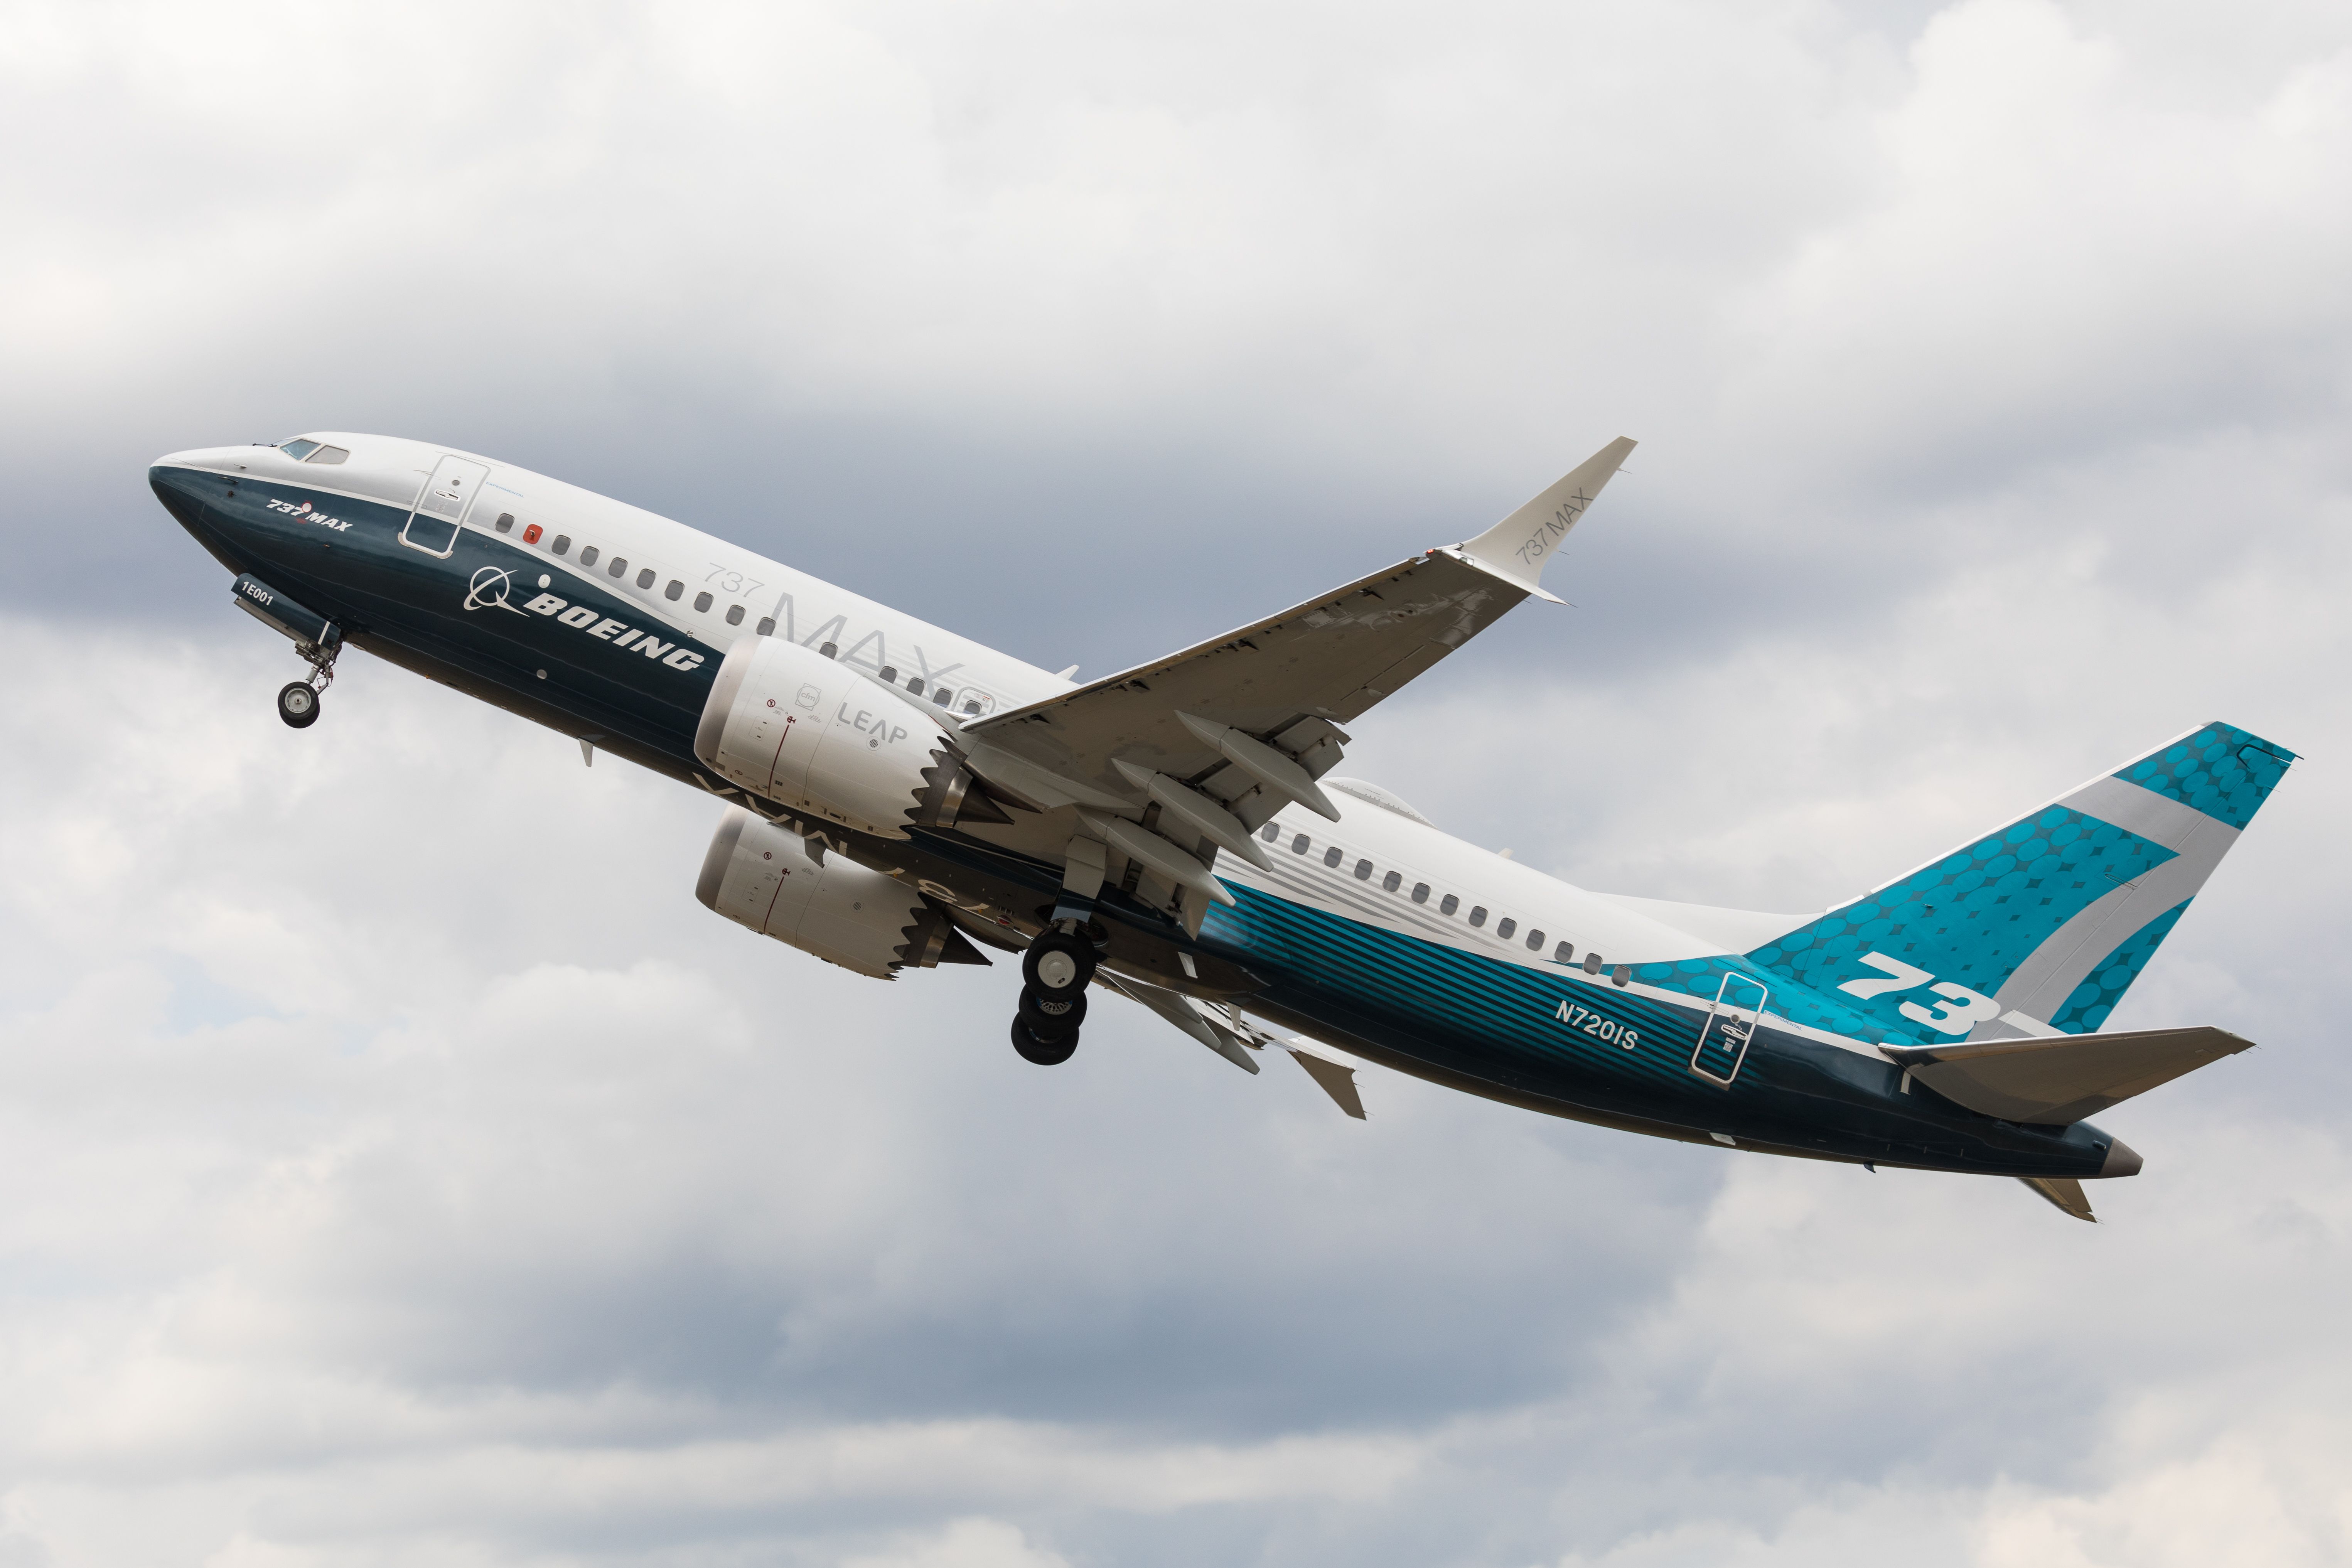 Boeing 737 MAX in the sky in Boeing livery